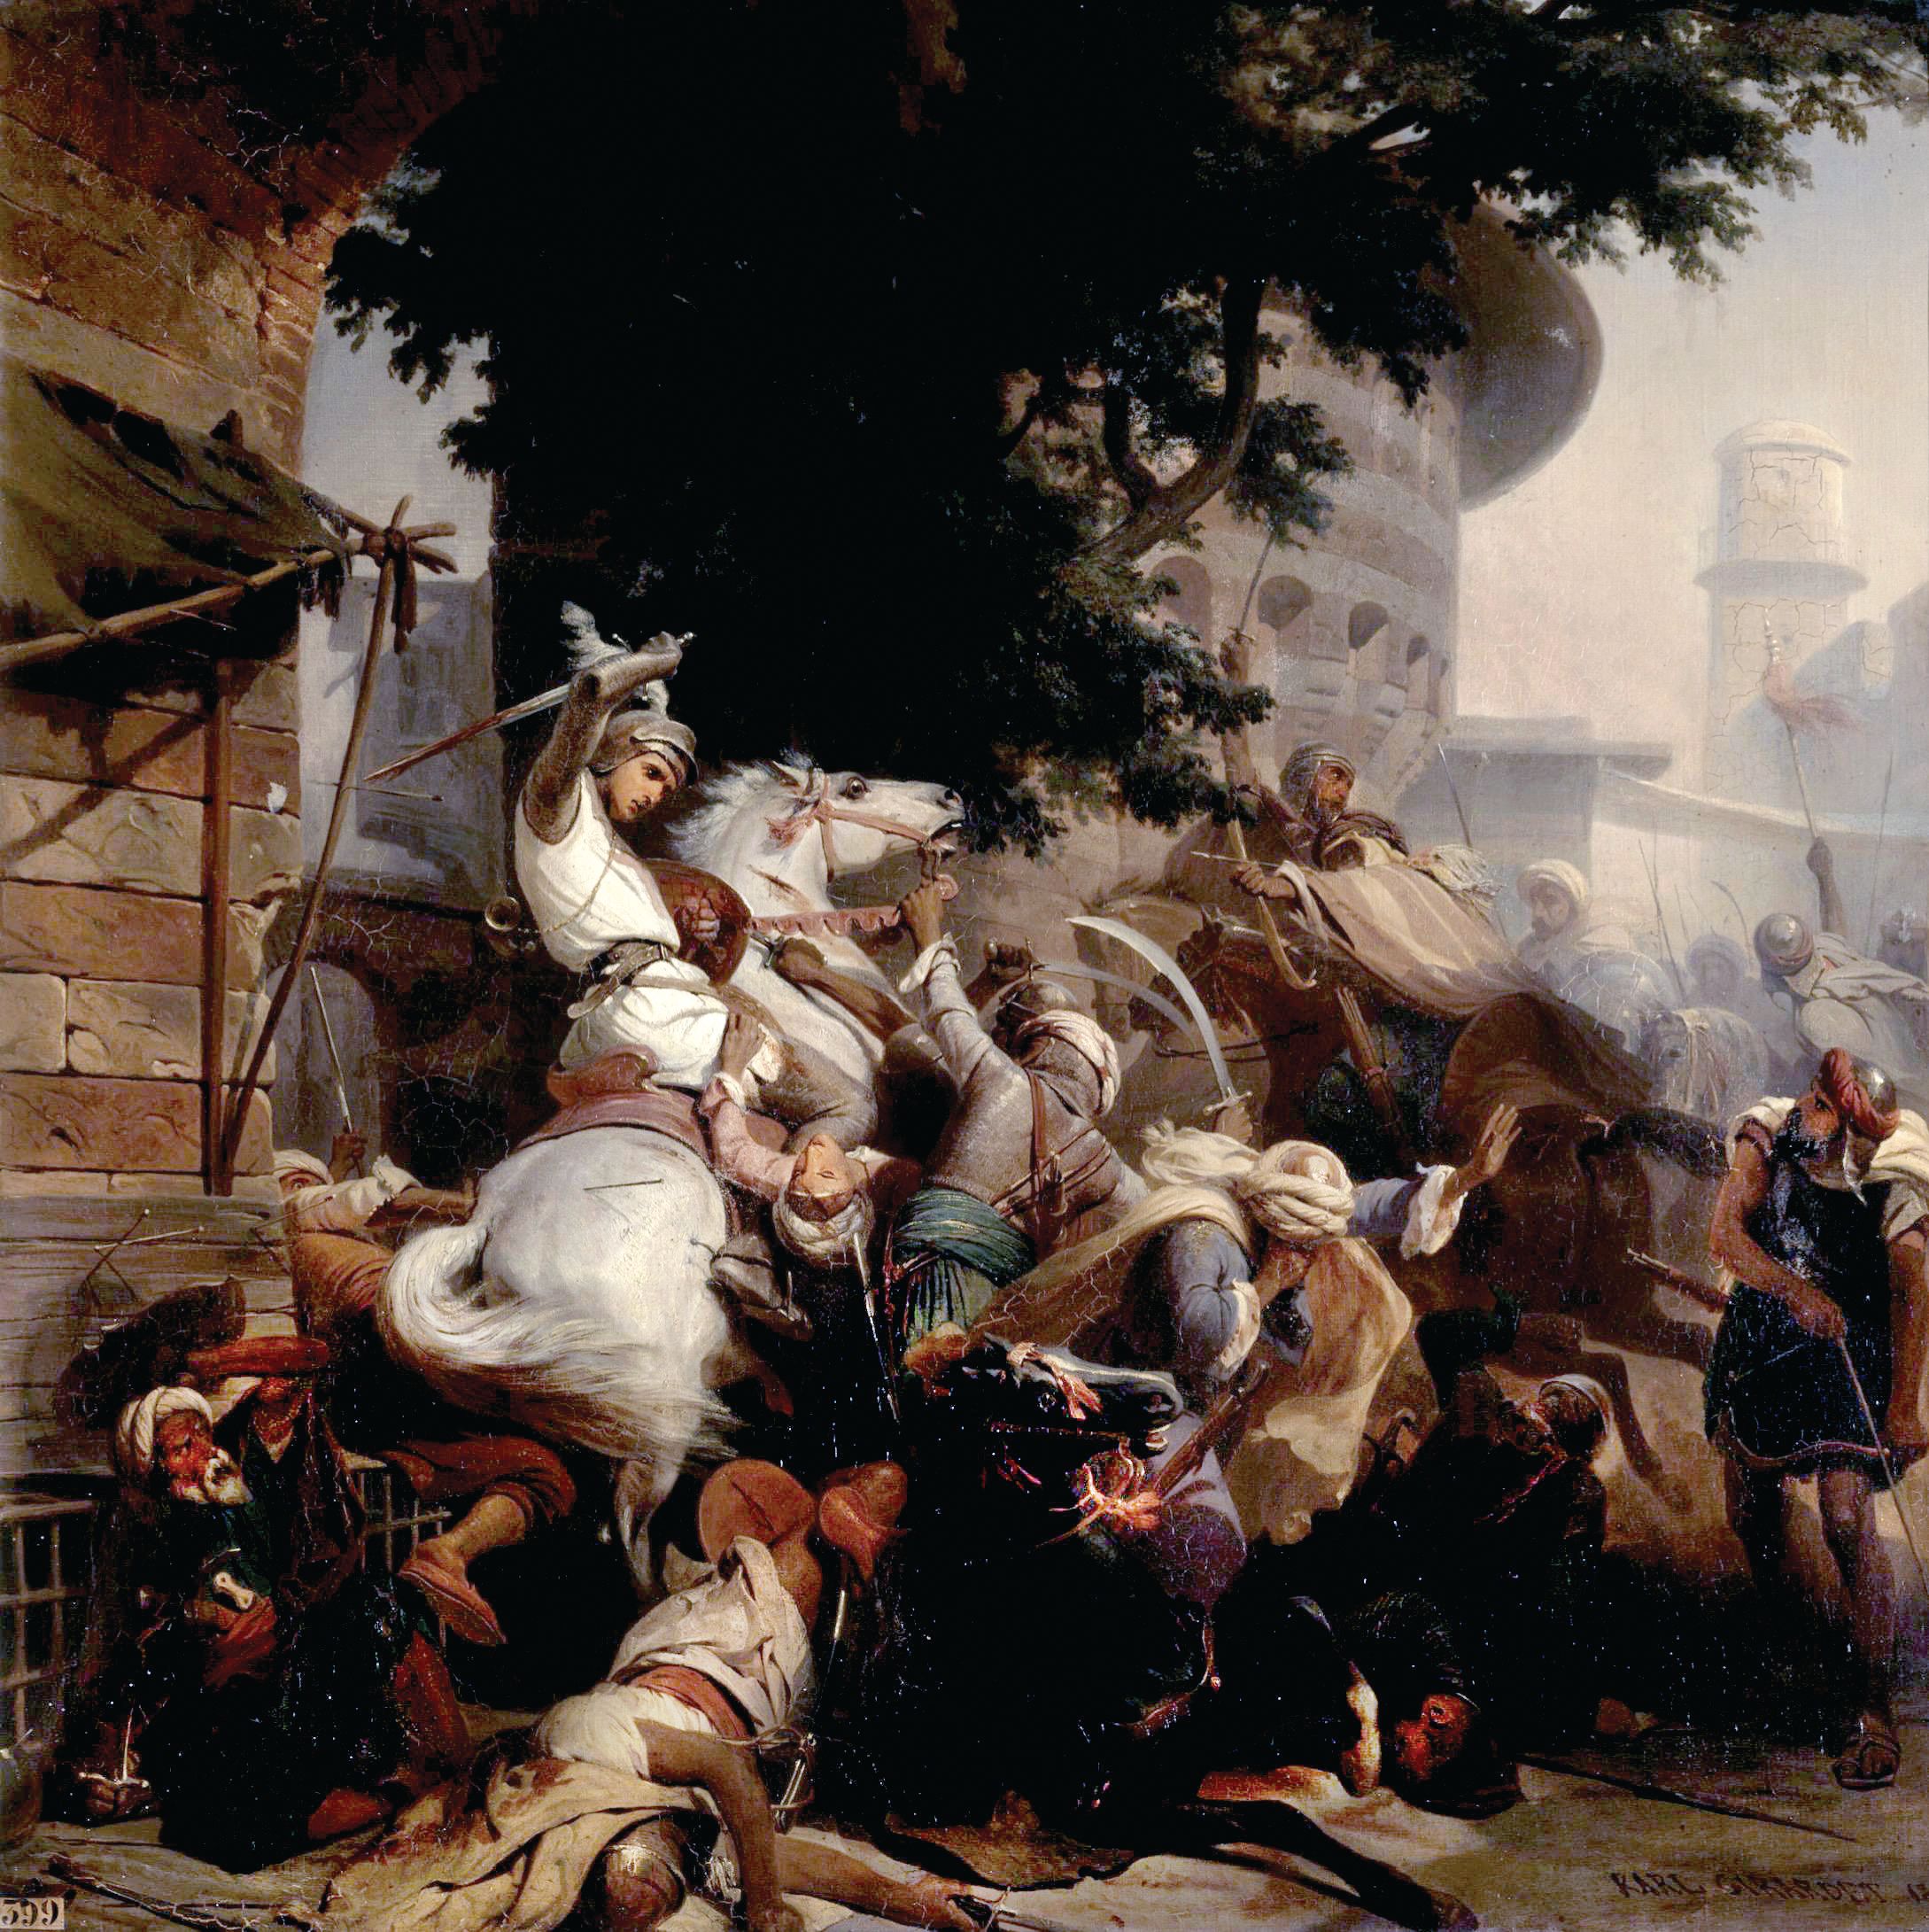 A French knight attempts to fend off Muslims on the narrow city streets of Mansourah. Unable to maneuver in the city streets, many were cut down.